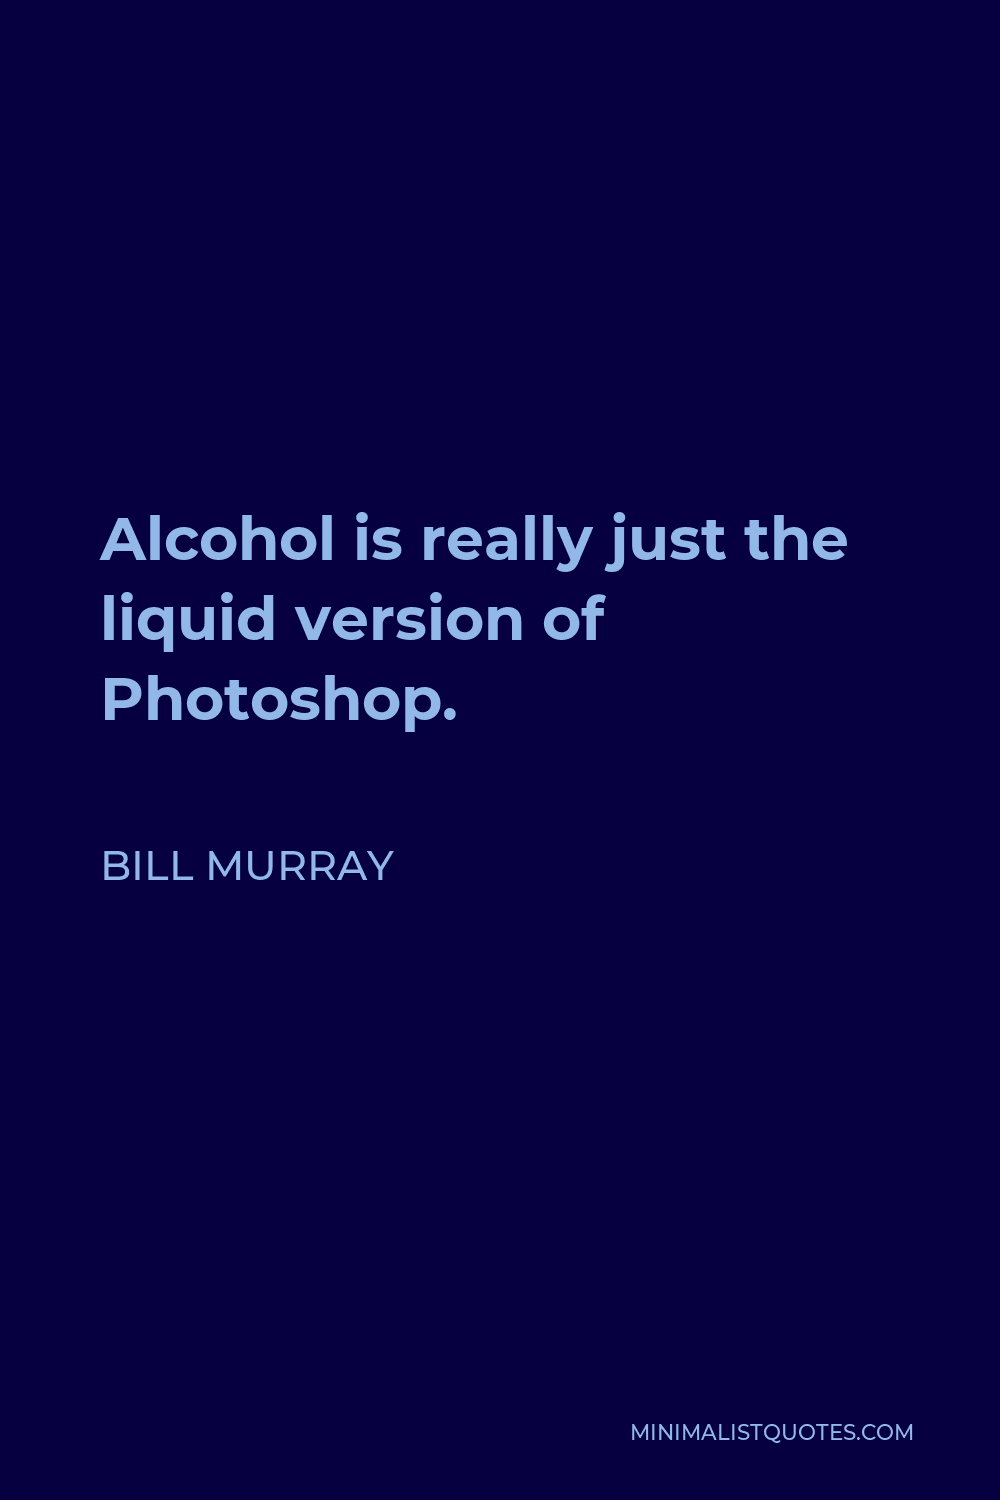 Bill Murray Quote - Alcohol is really just the liquid version of Photoshop.